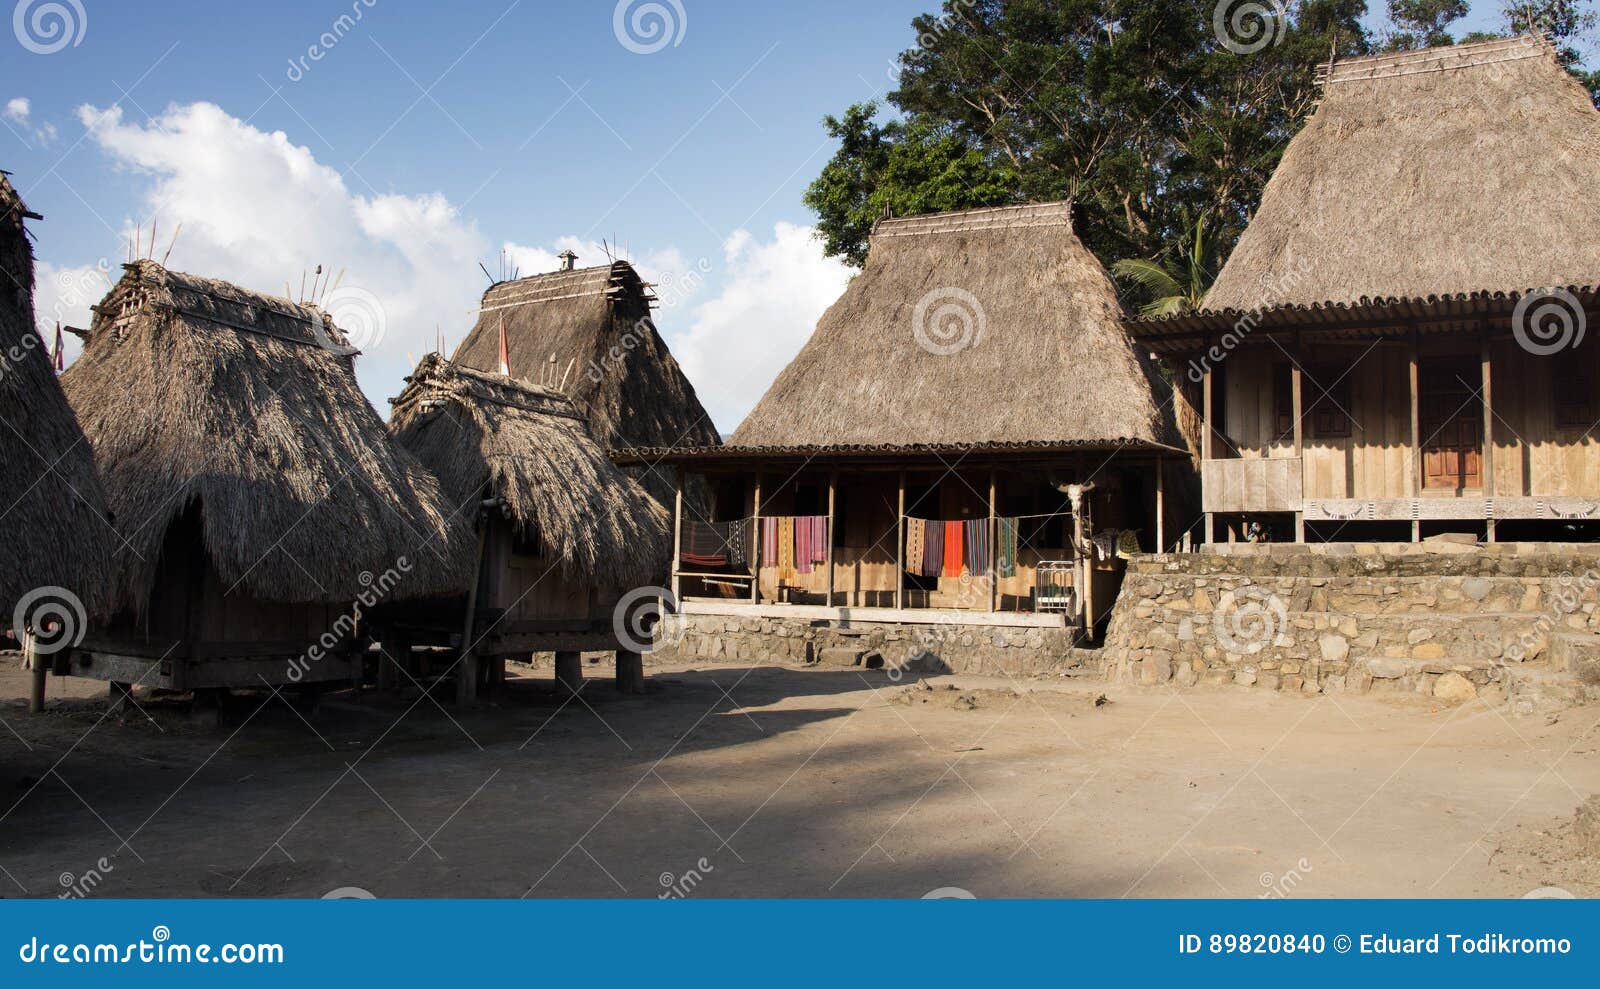 bena a traditional village with grass huts of the ngada people in flores near bajawa.